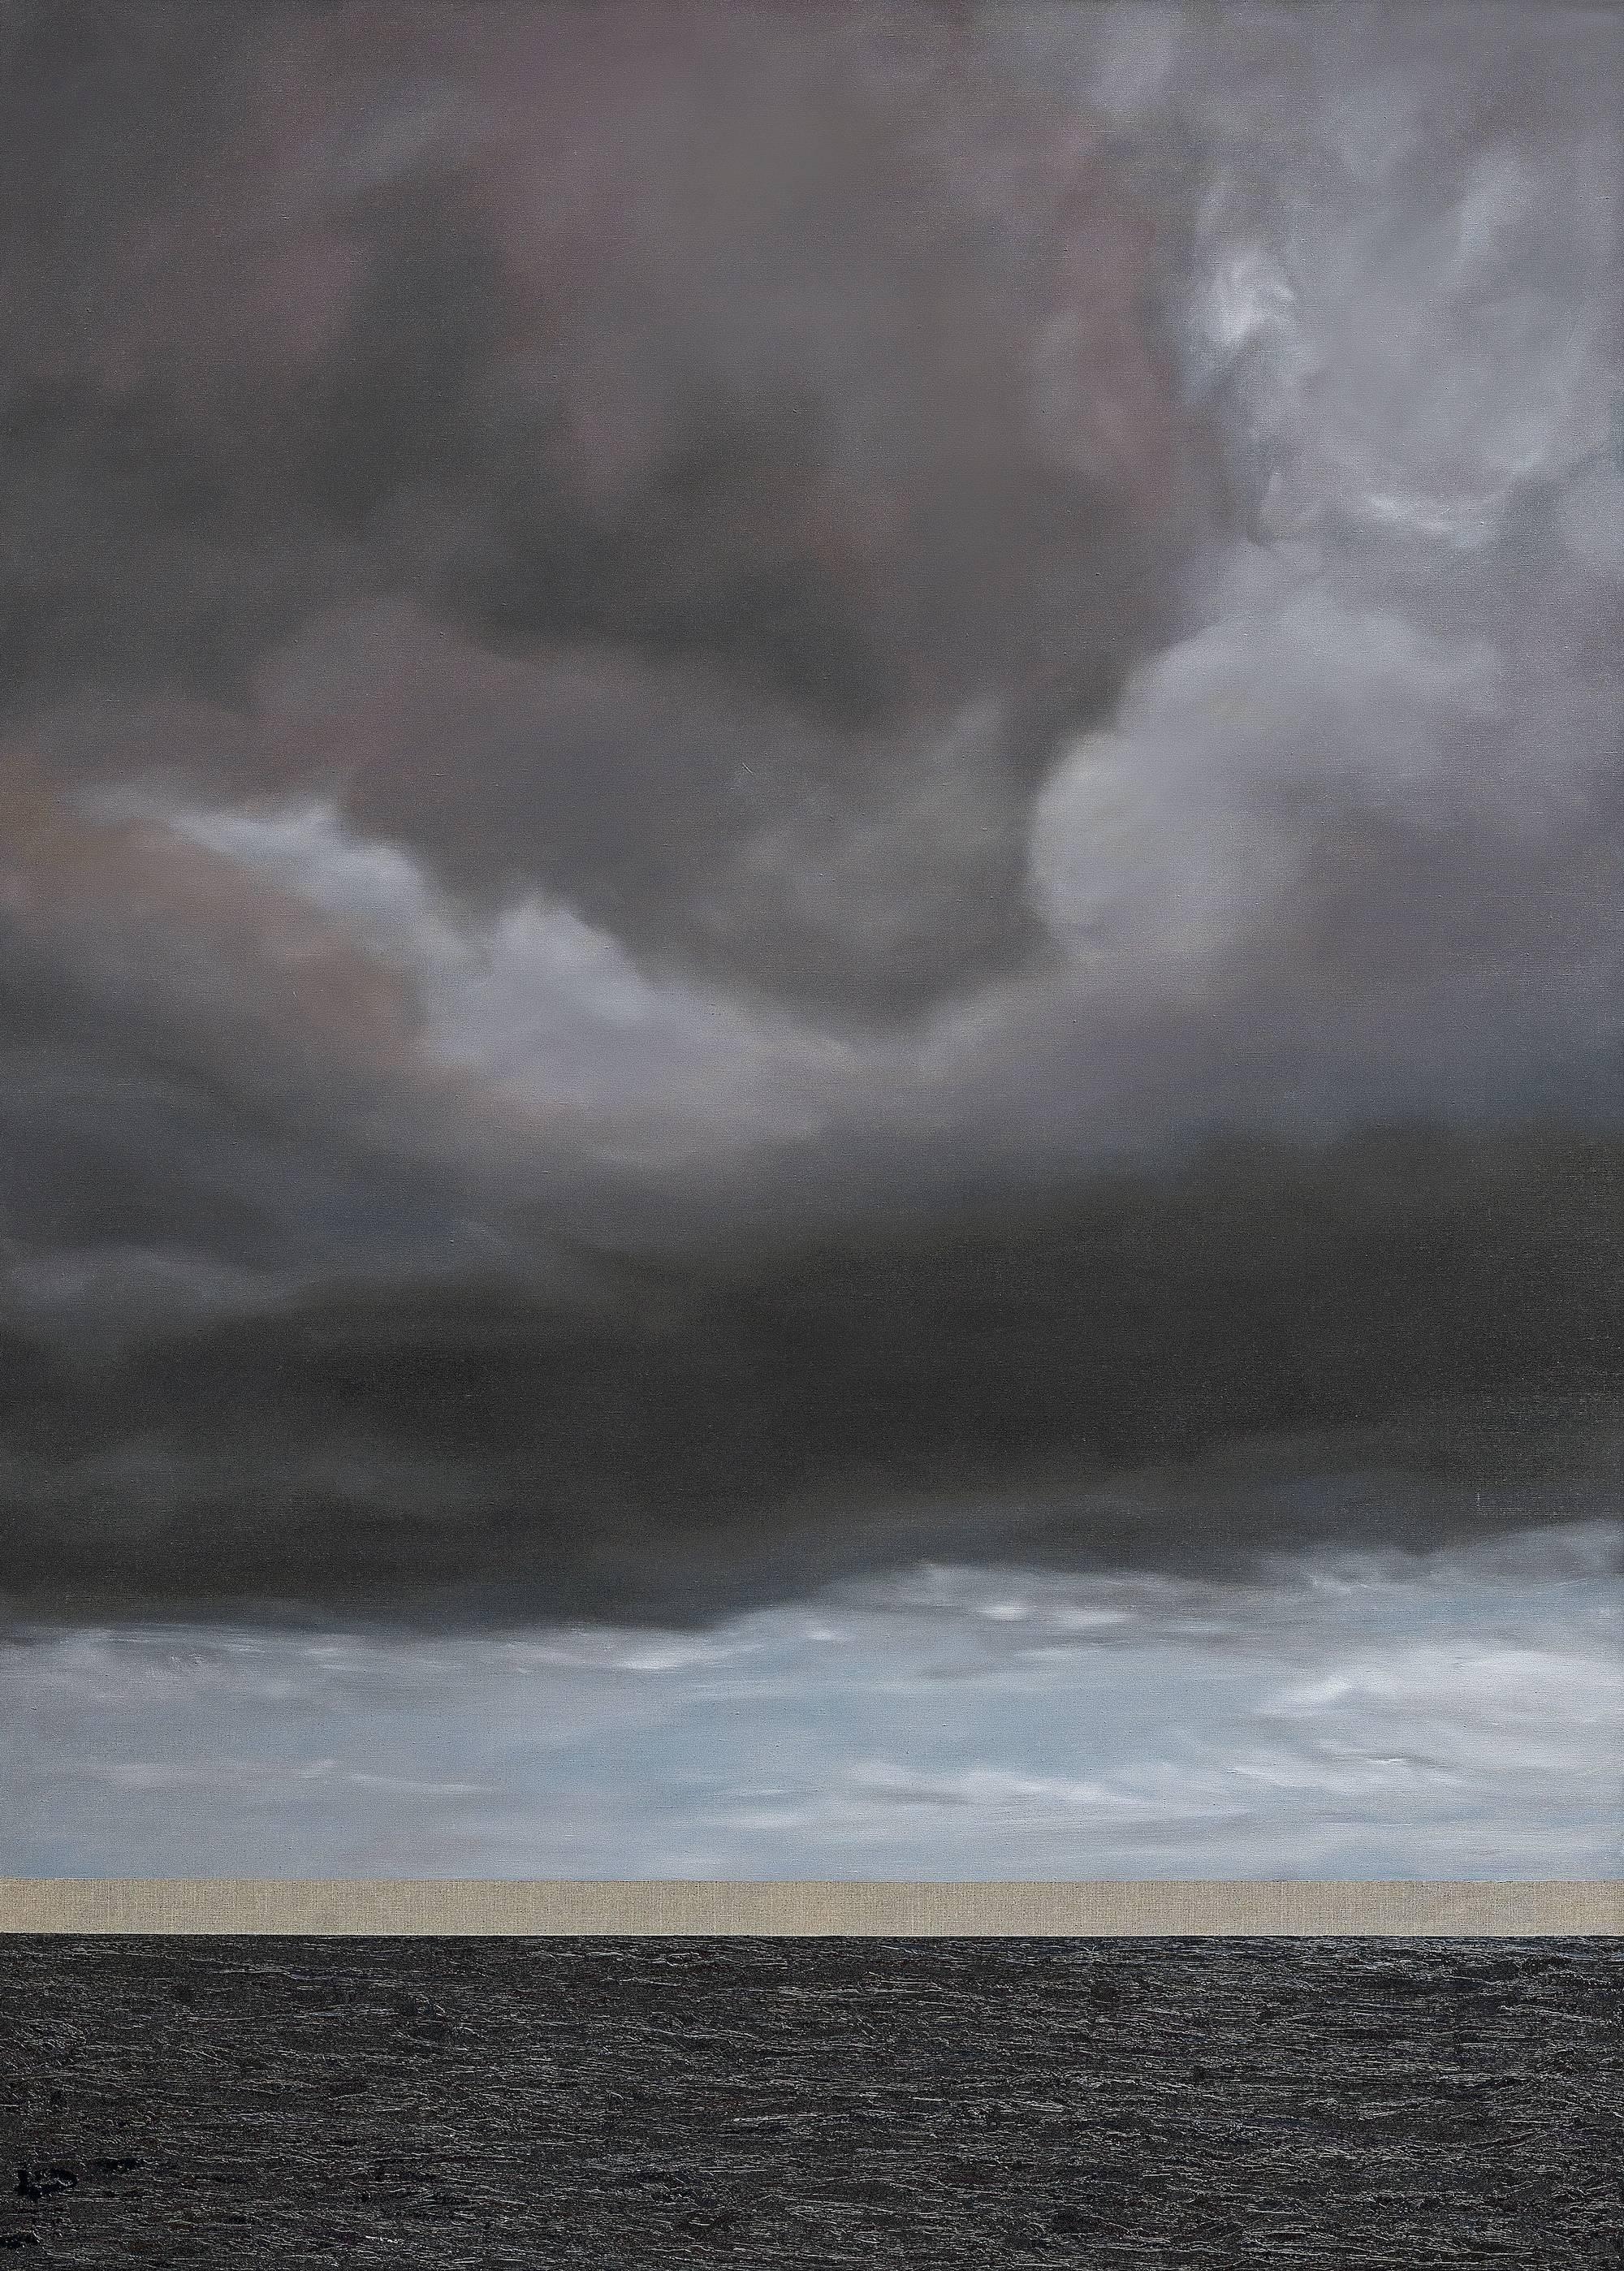 Frédéric Choisel Abstract Painting - ELPIS / Hope - oil on linen, 84 x 60 inches - clouds, sea, water, grey, indigo